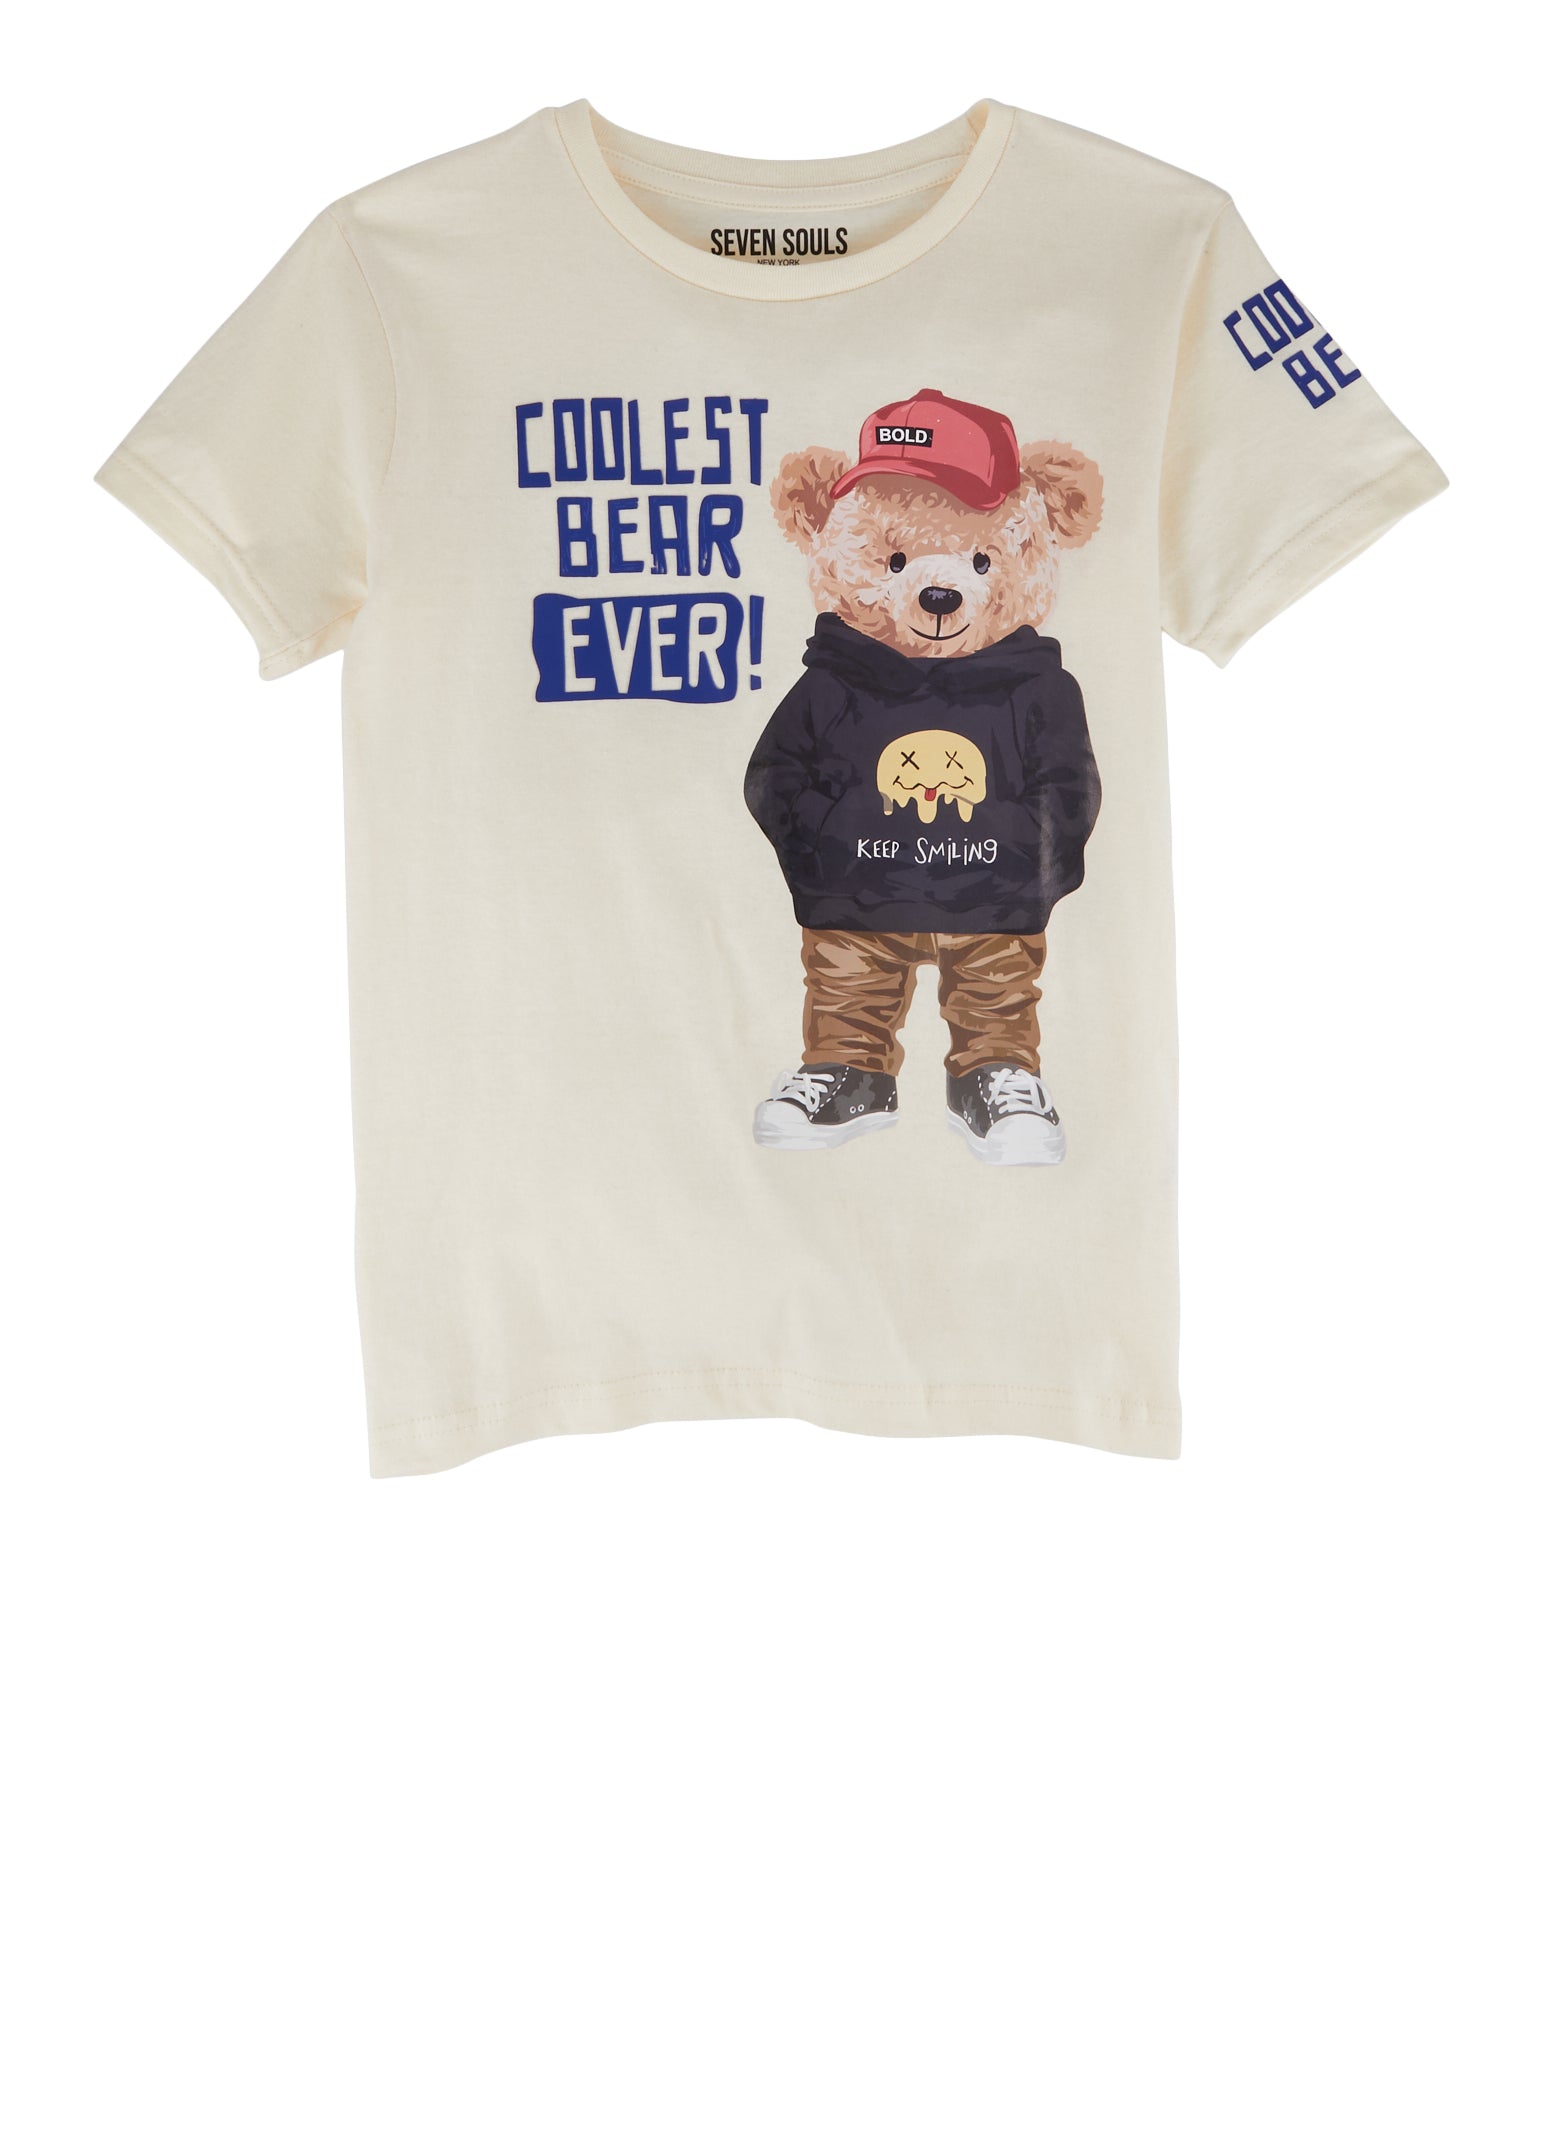 Boys Coolest Bear Ever Graphic Tee, Beige, Size 10-12